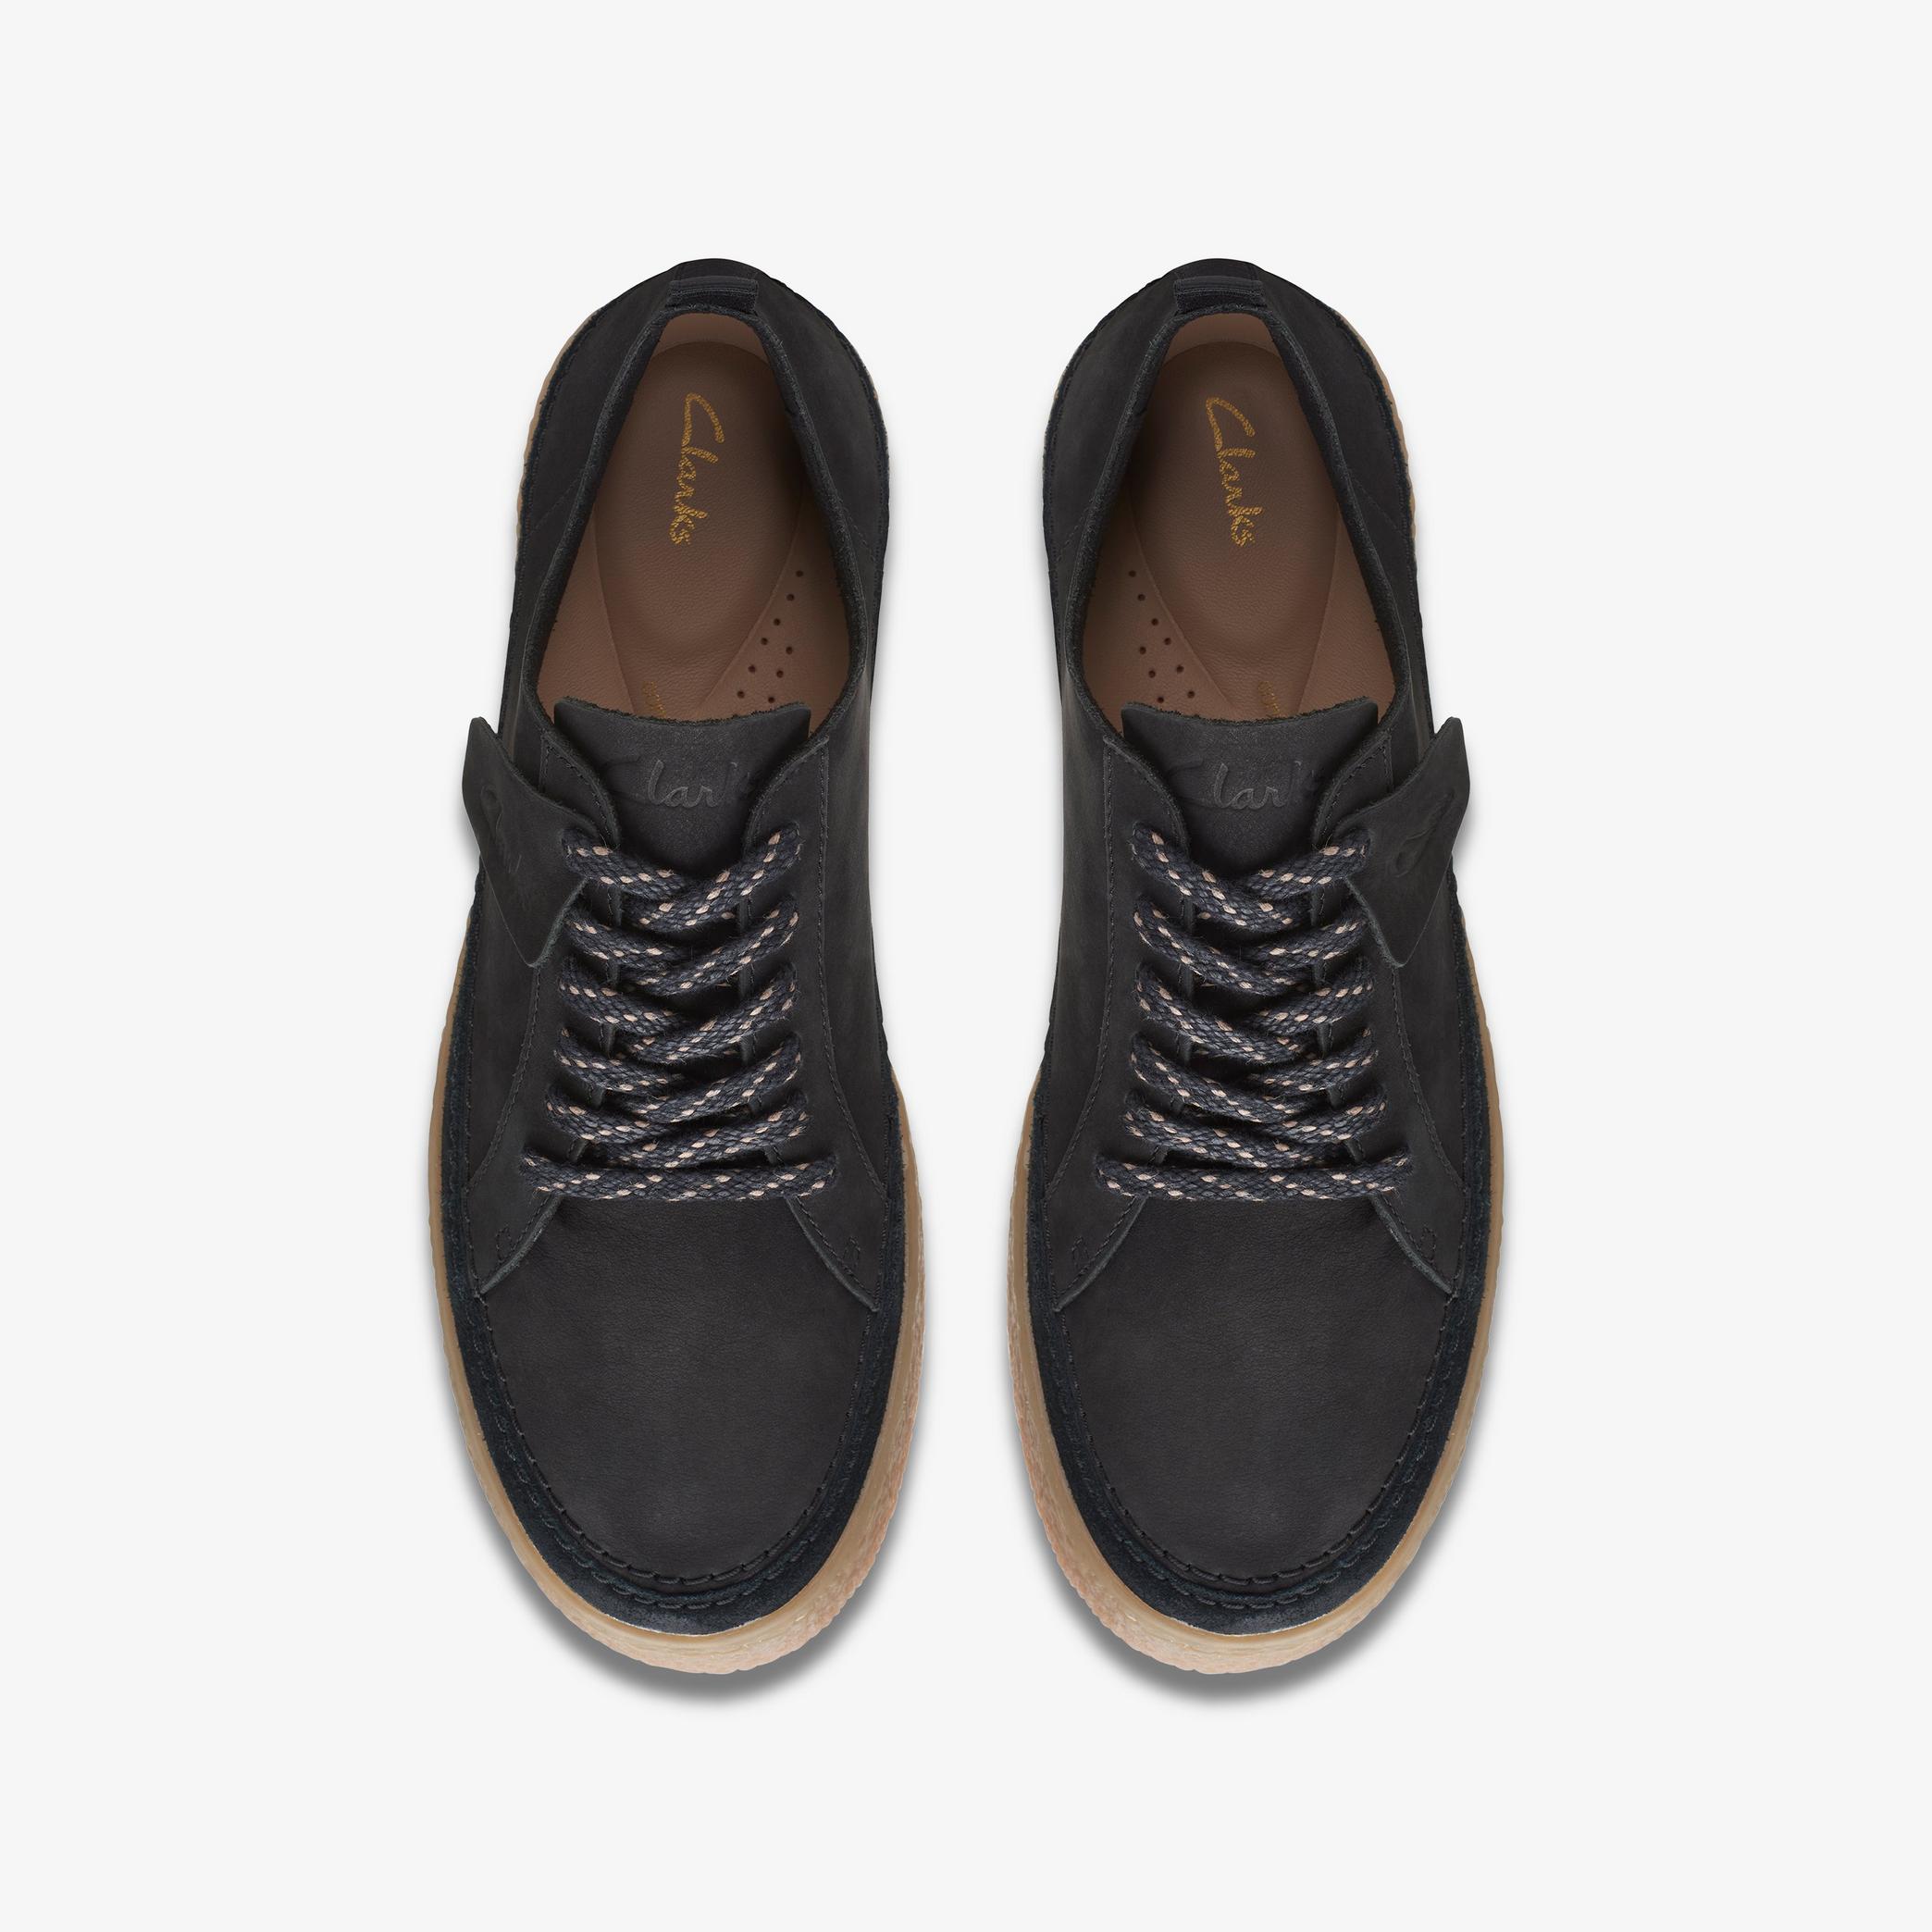 Barleigh Lace Black Nubuck Derby Shoes, view 6 of 6